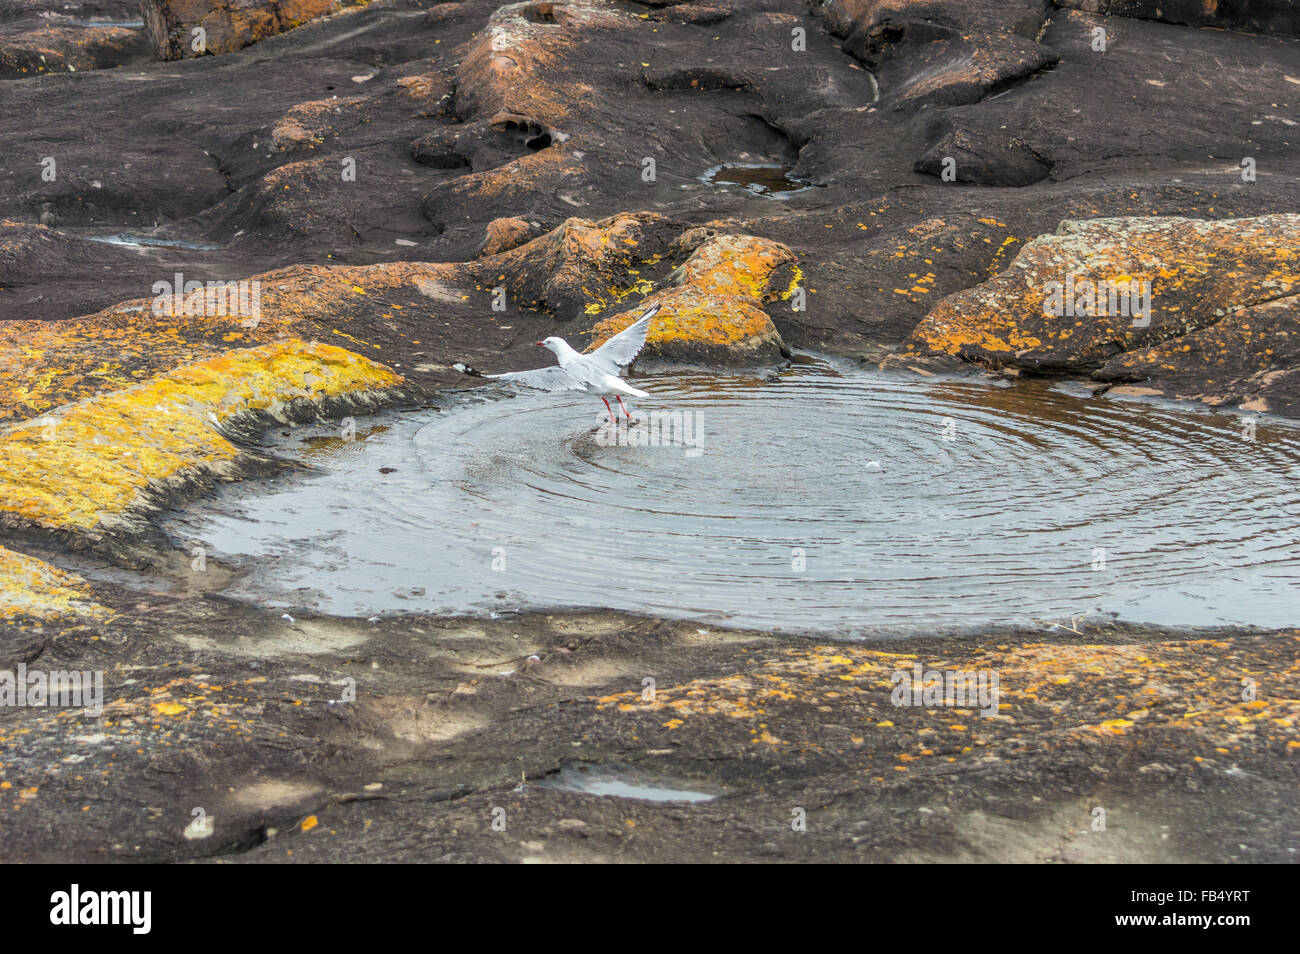 Seagull in rock-pool, Seagull bathing in rockpool, Seagull flying out of rockpool, coastal bird in flight. Laridae. Stock Photo